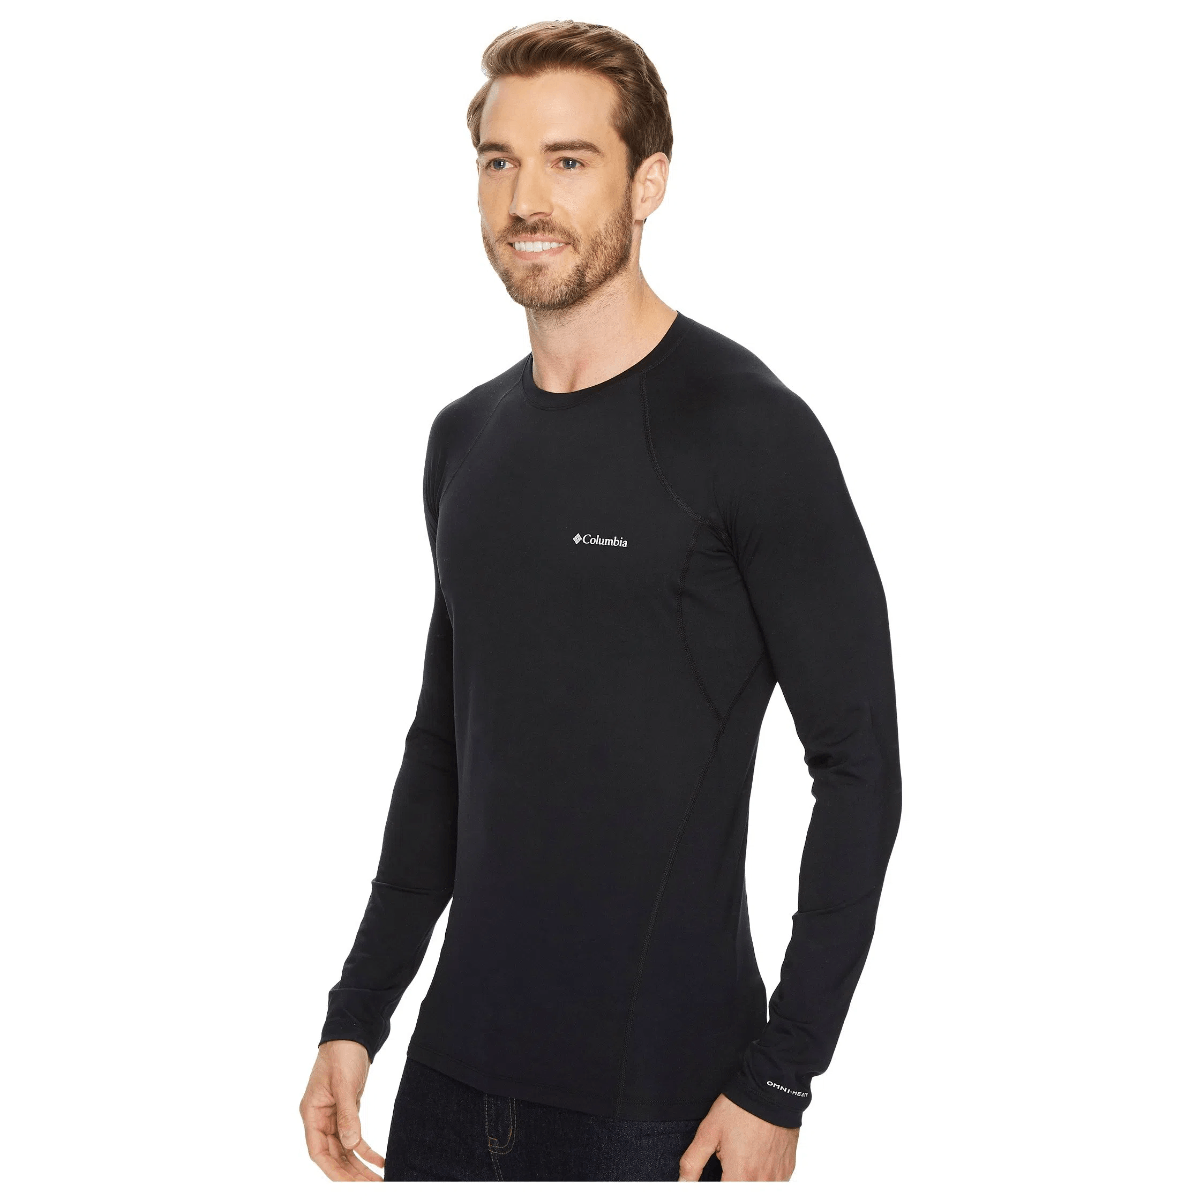 Columbia Midweight Stretch Long Sleeve Shirt - Men's - Al's Sporting Goods:  Your One-Stop Shop for Outdoor Sports Gear & Apparel